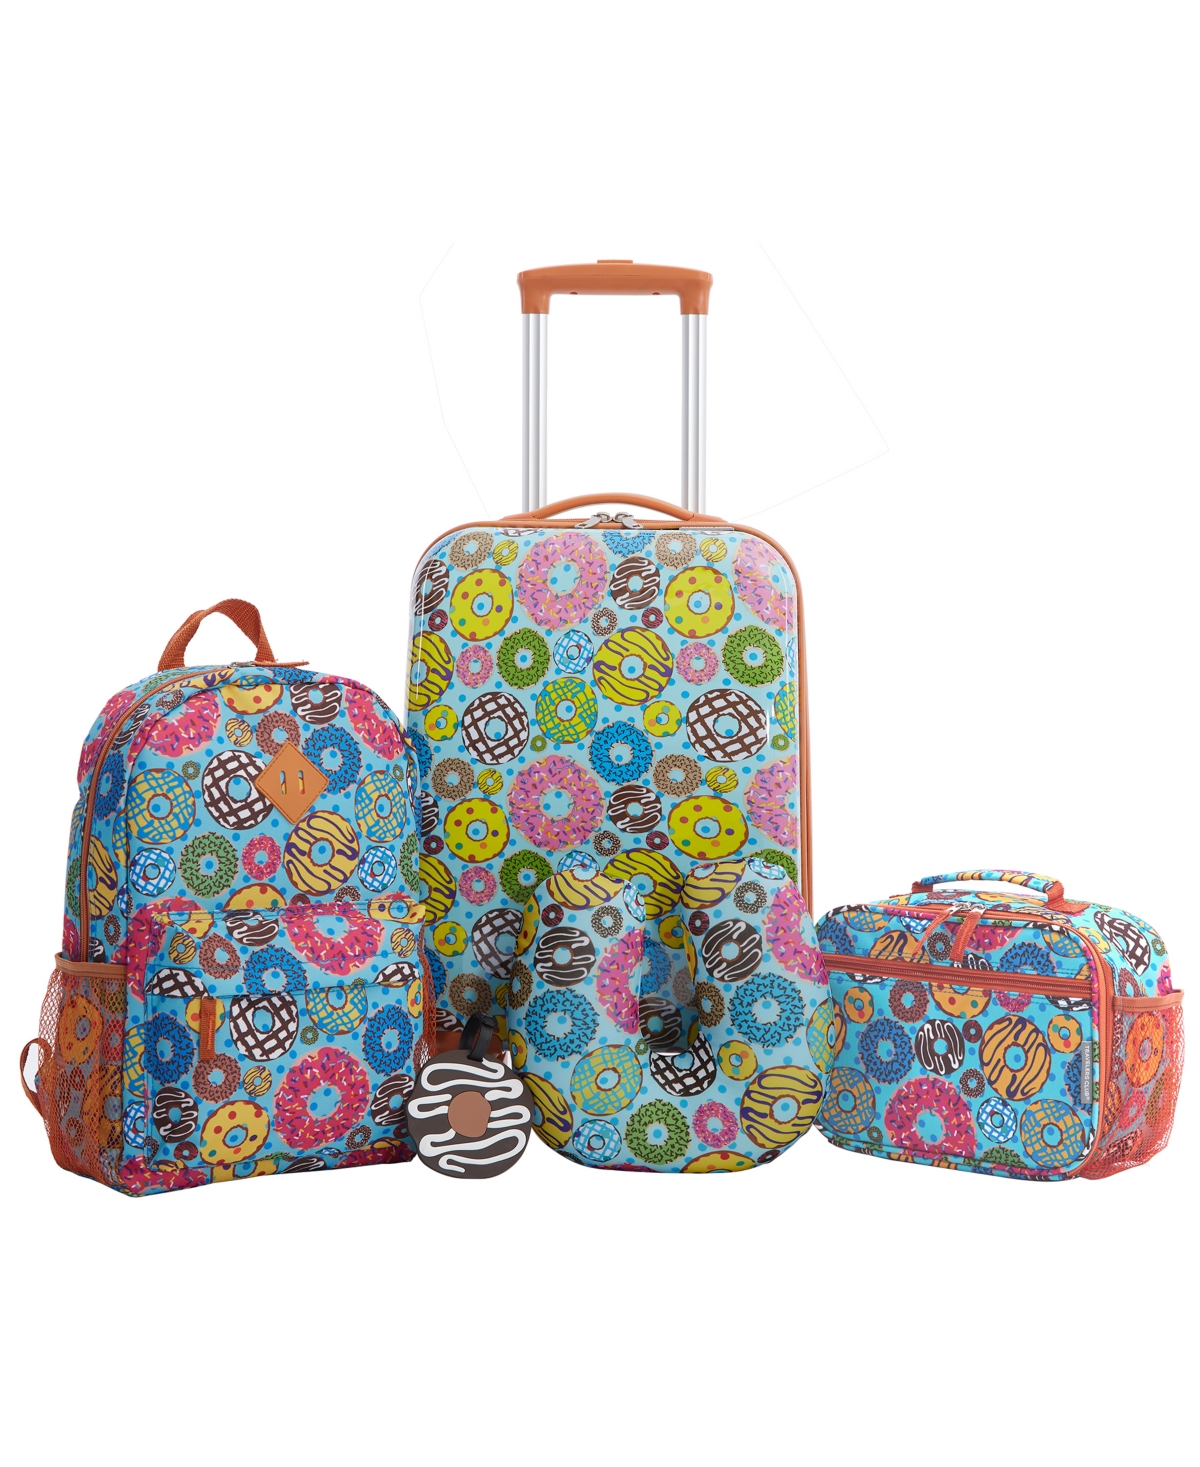 Travelers Club Kid's Hard Side Carry-on Spinner 5 Piece Luggage Set In Donut